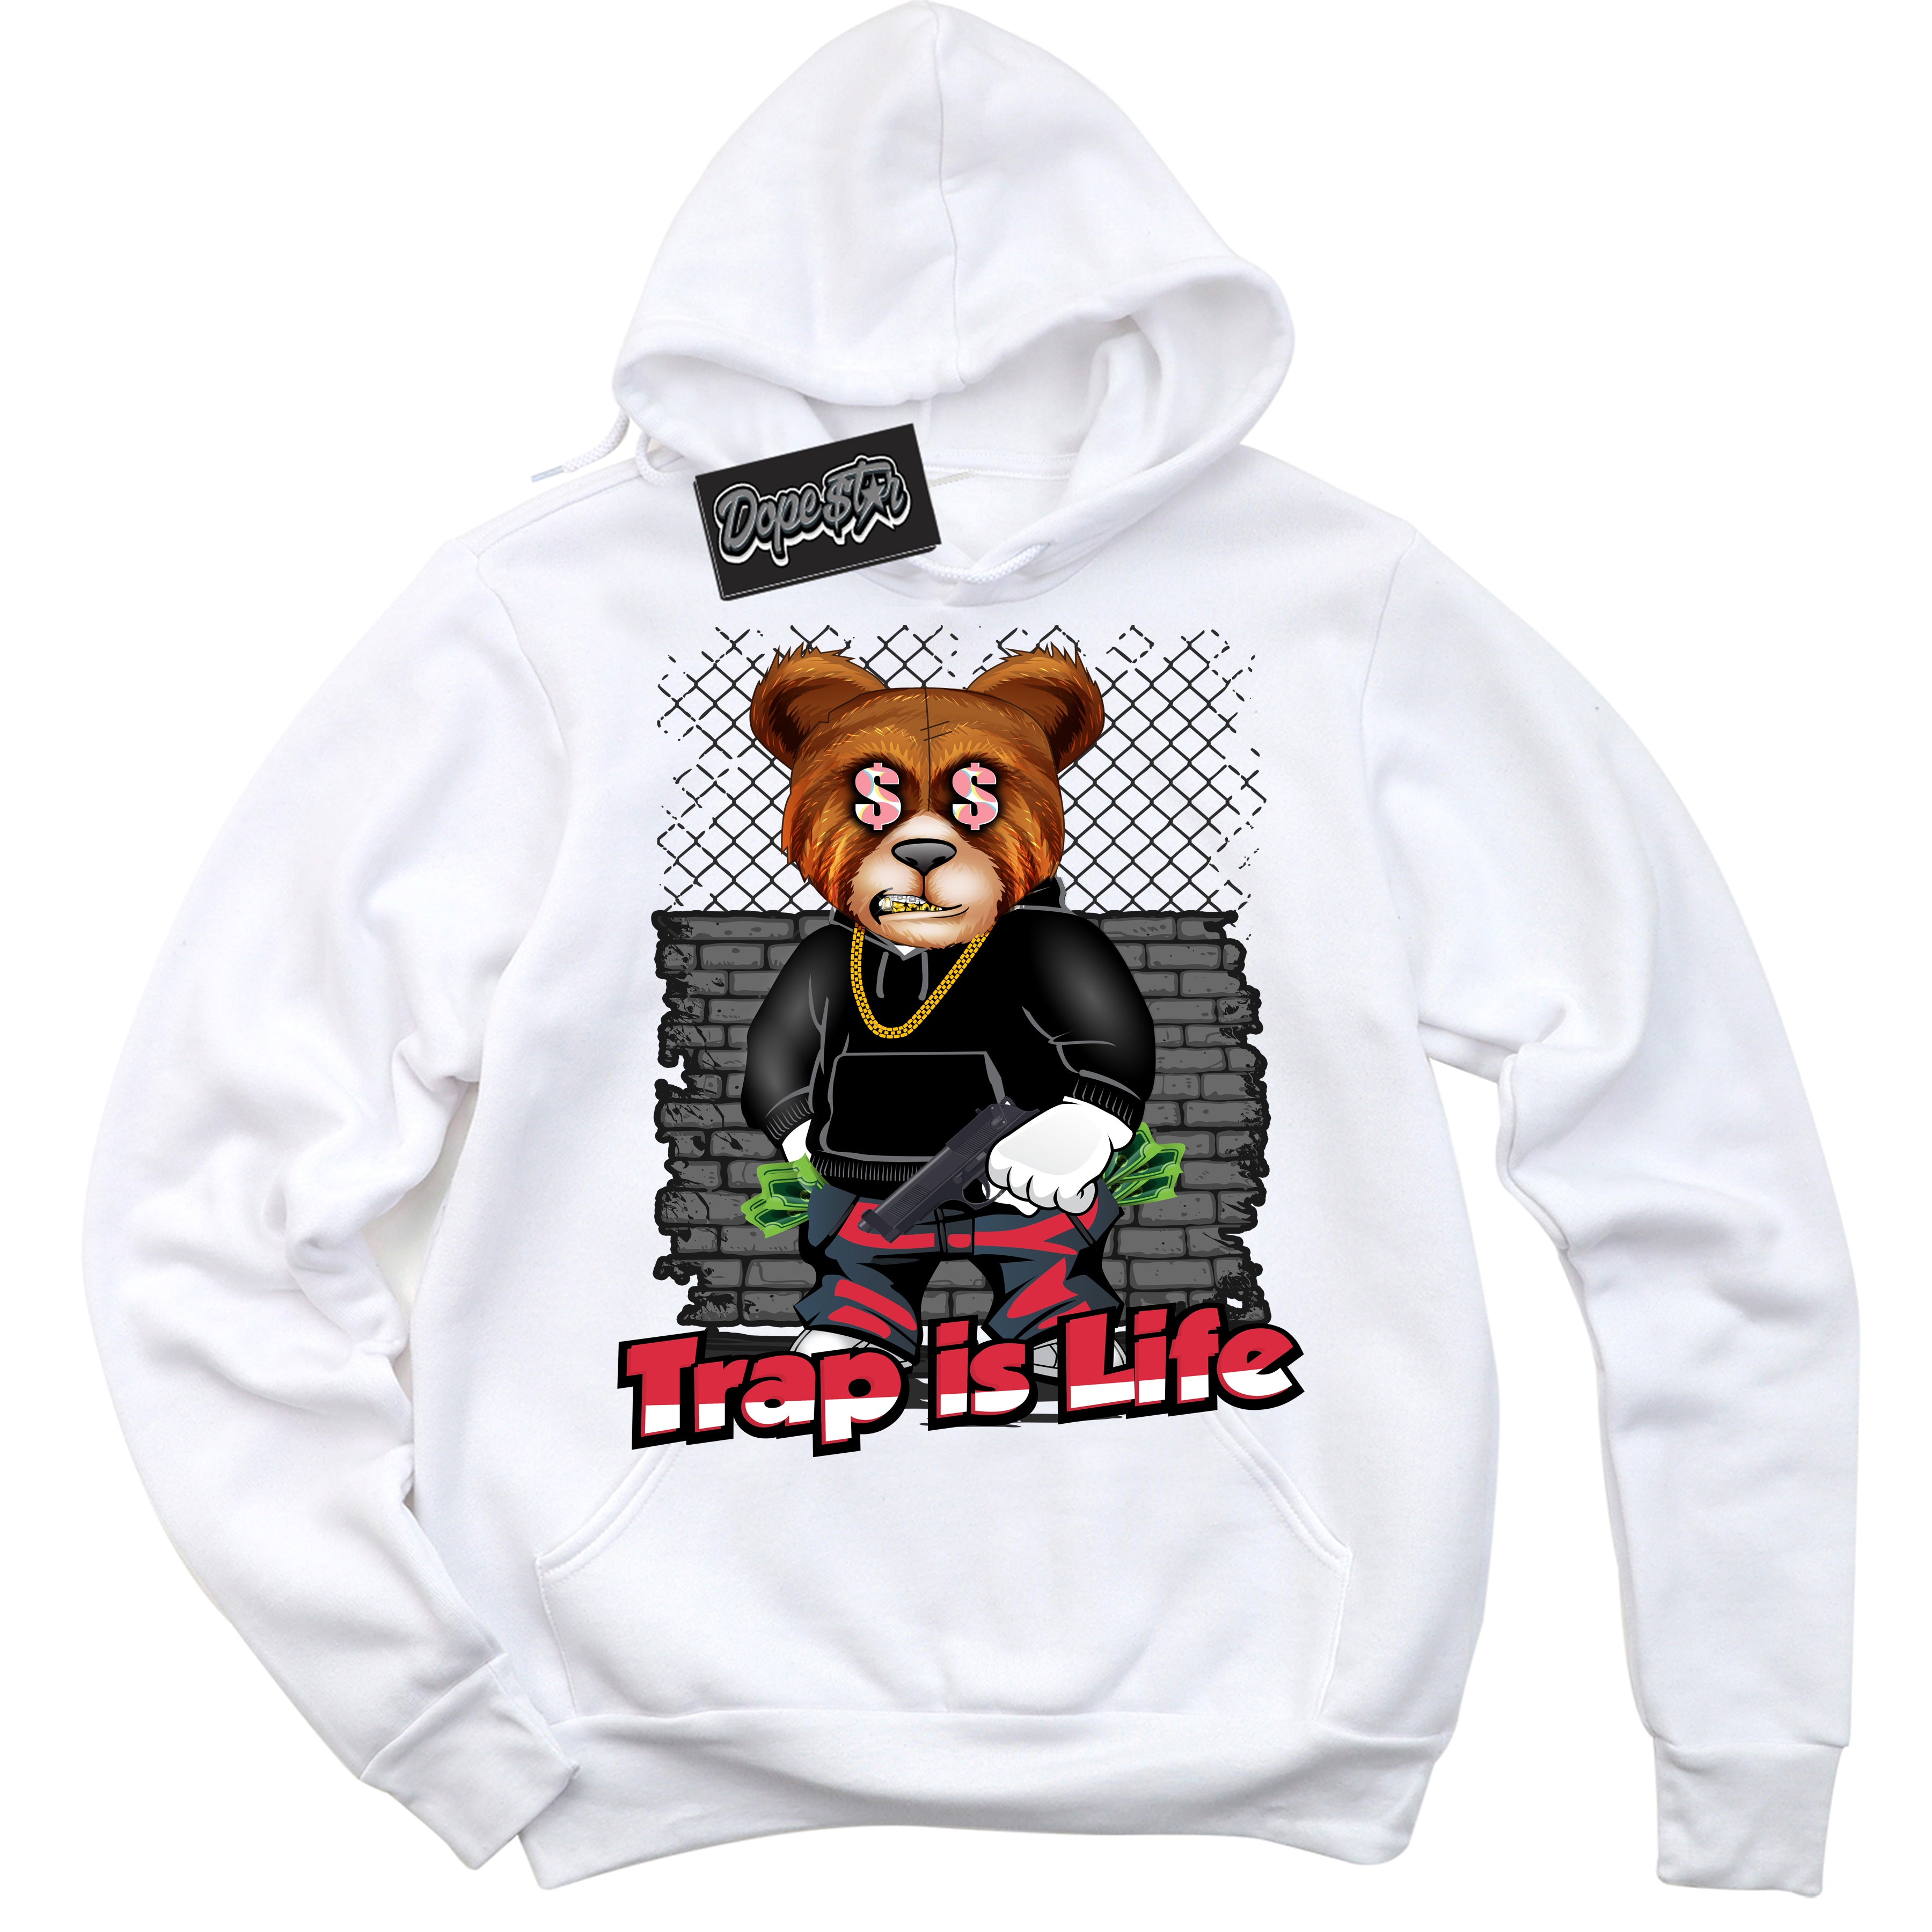 Cool White Graphic DopeStar Hoodie with “ Trap Is Life “ print, that perfectly matches Spider-Verse 1s sneakers